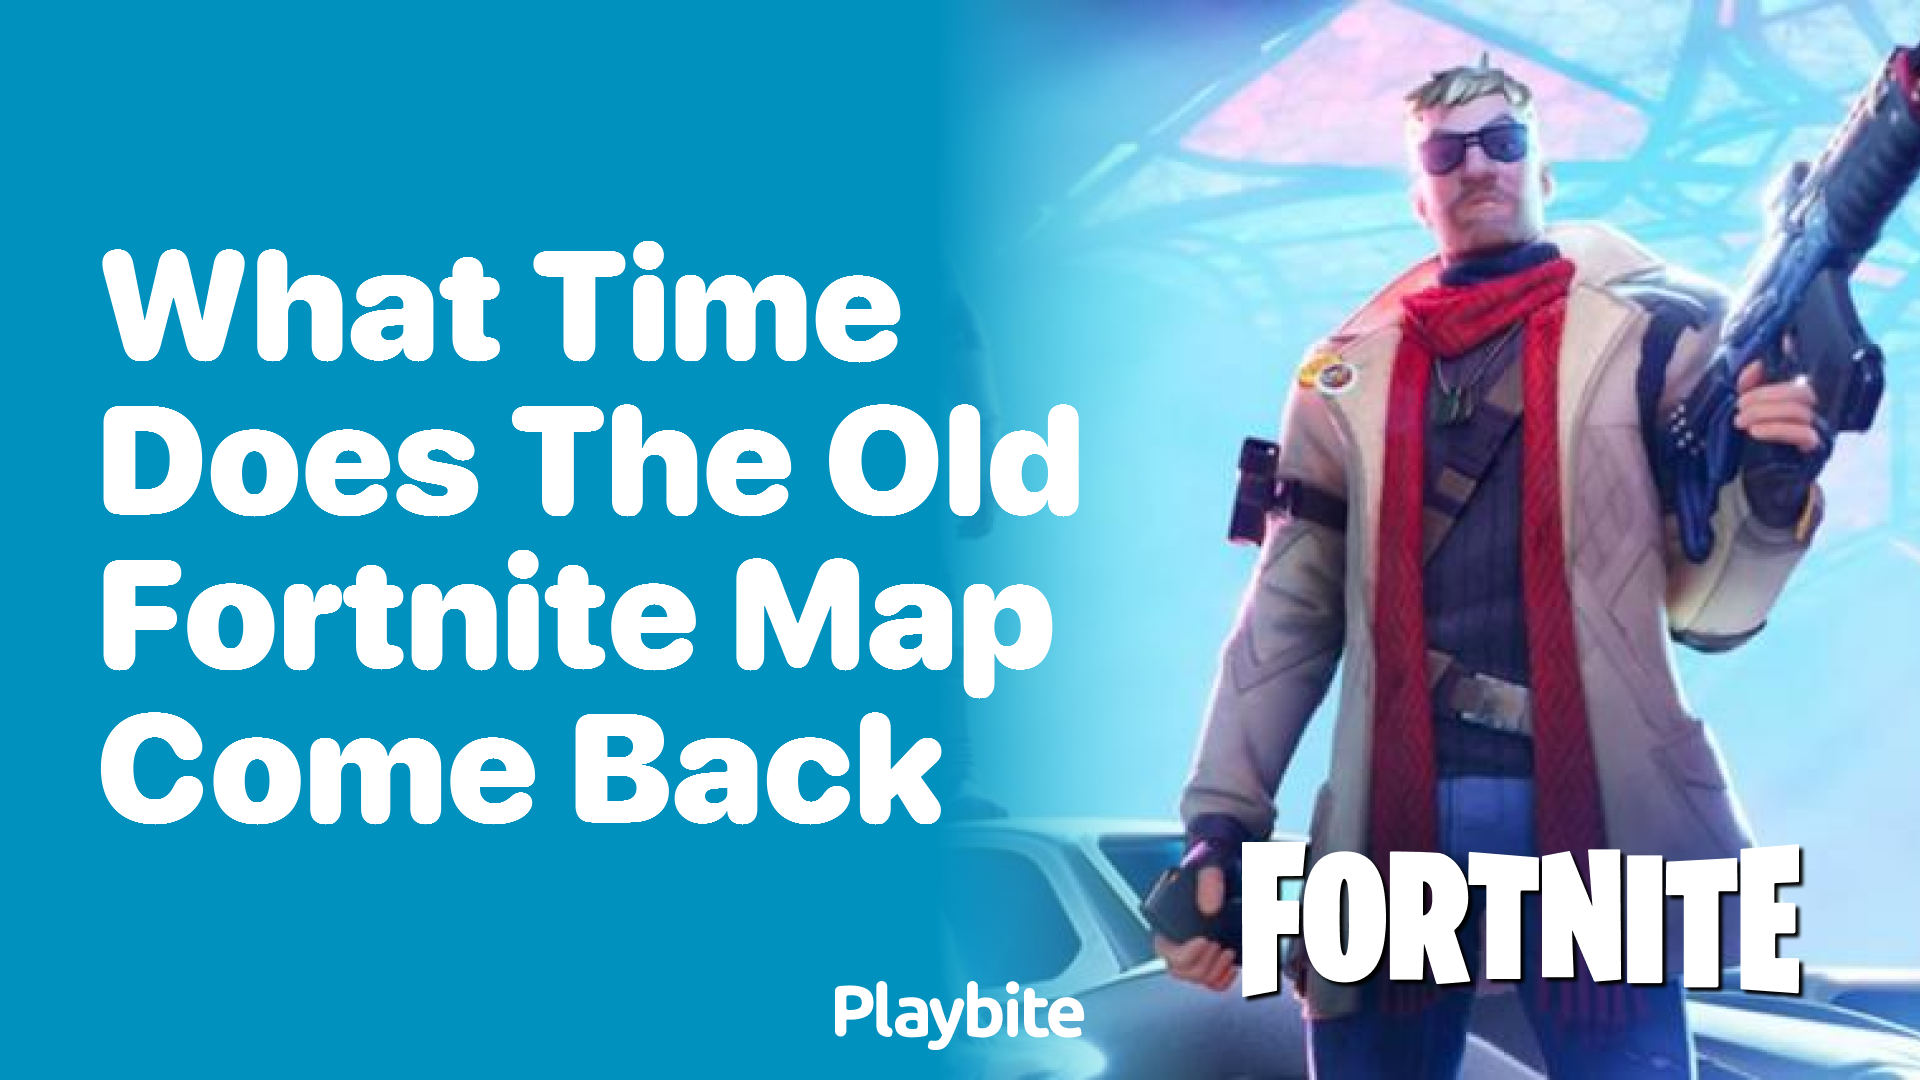 What Time Does the Old Fortnite Map Come Back?